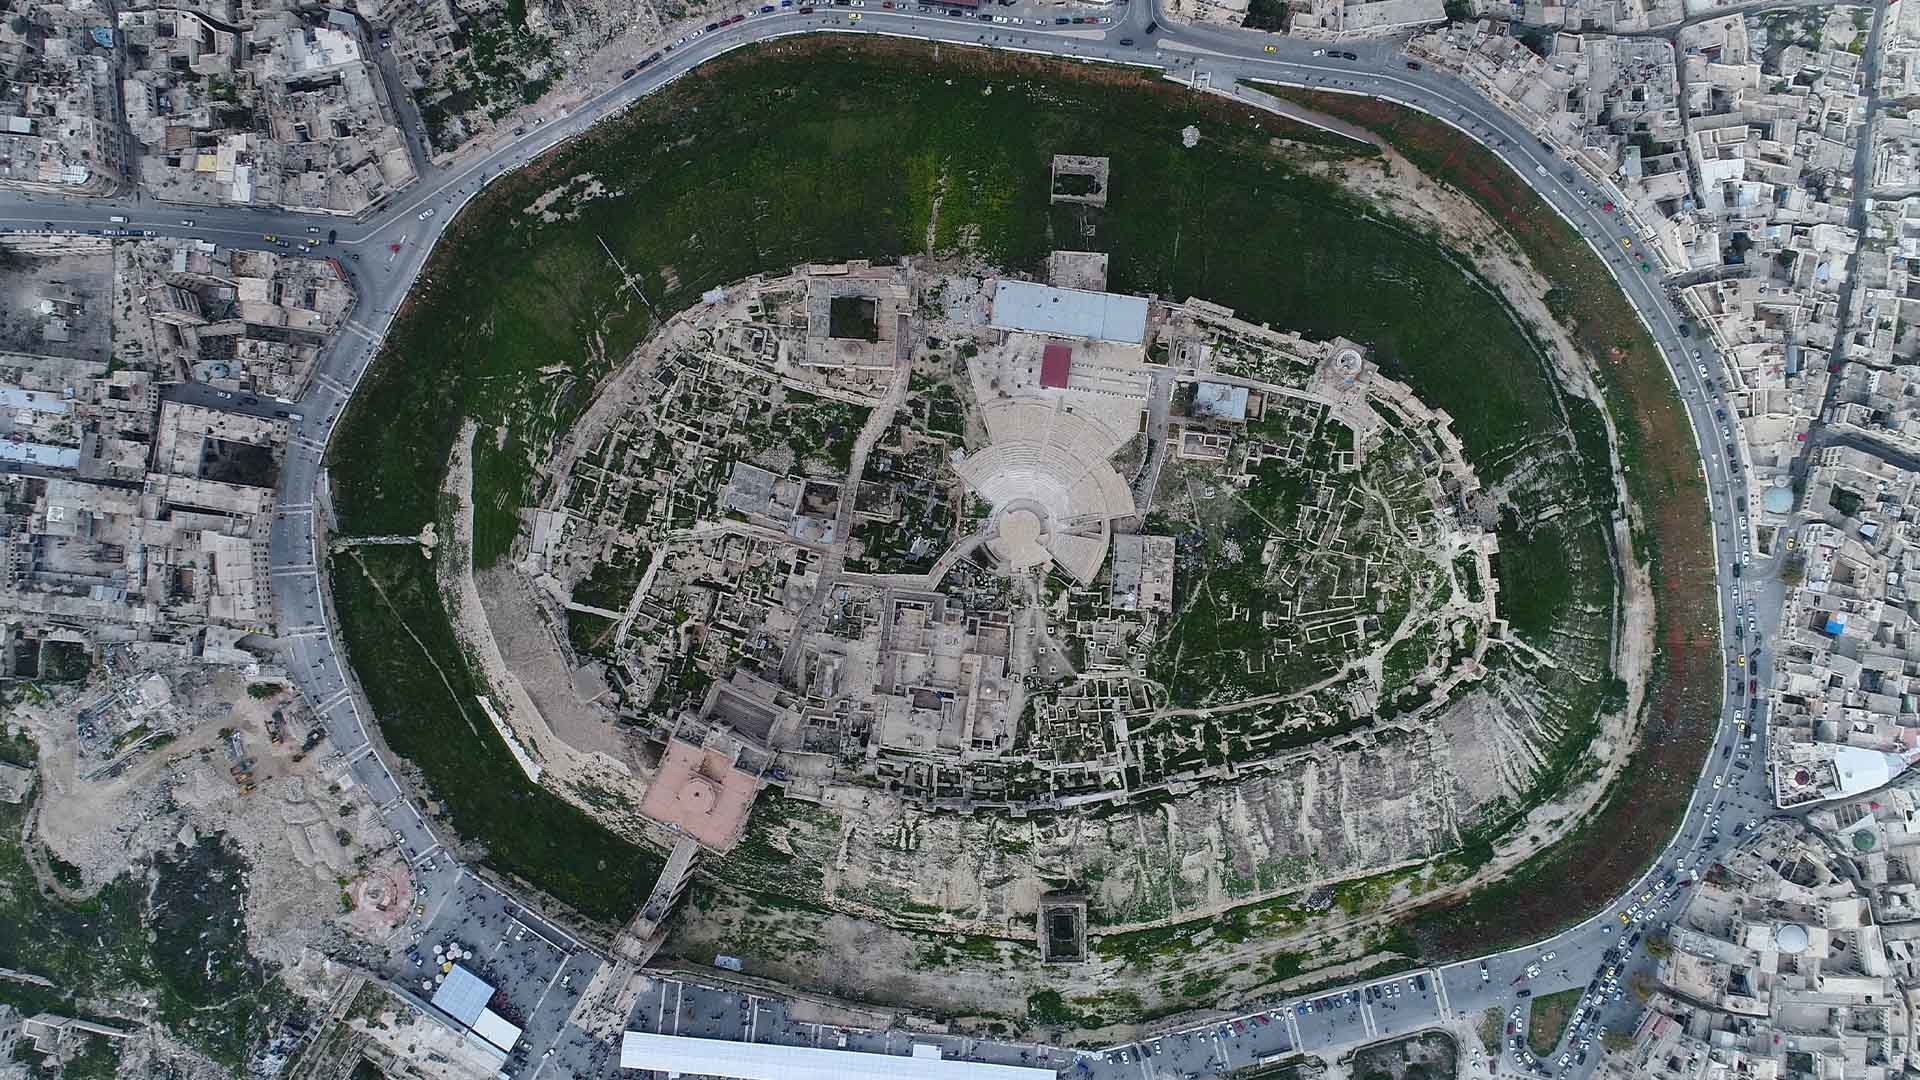 The aerial photograph captures a captivating view of the iconic Citadel of Aleppo, which holds a commanding position atop a hill in the heart of the city.